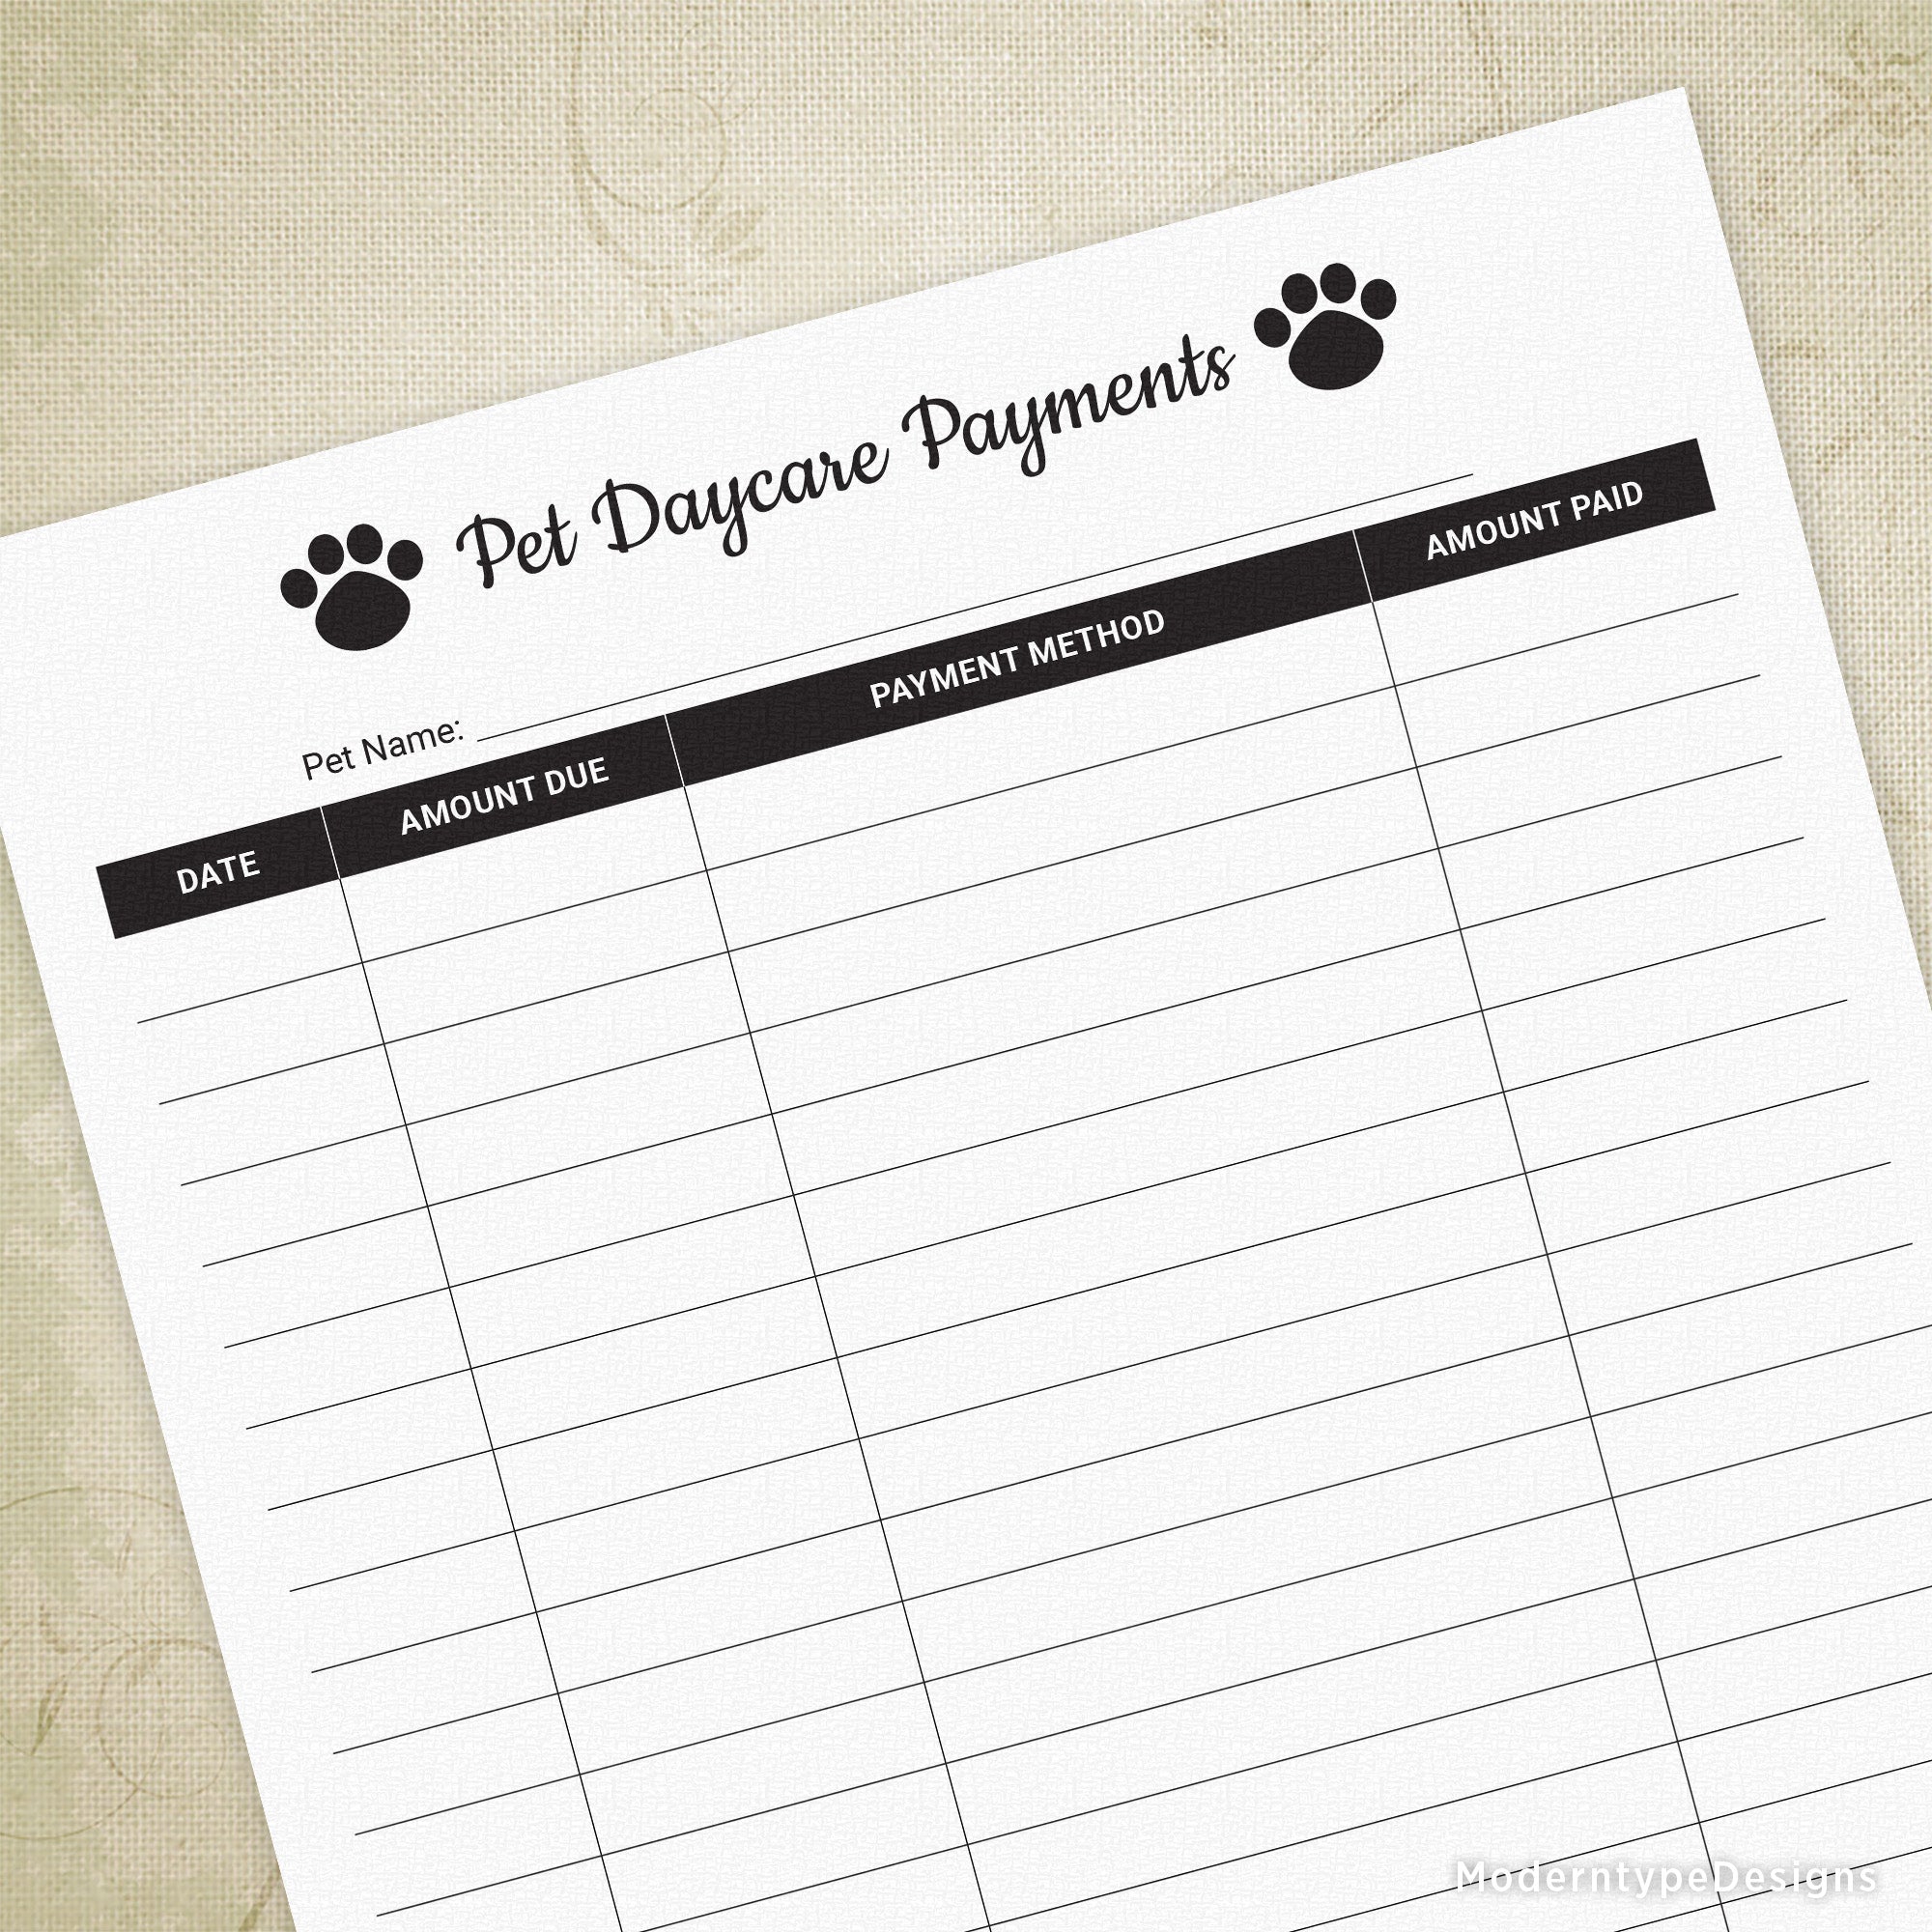 Pet Daycare Payments Log Printable for Pet Owners